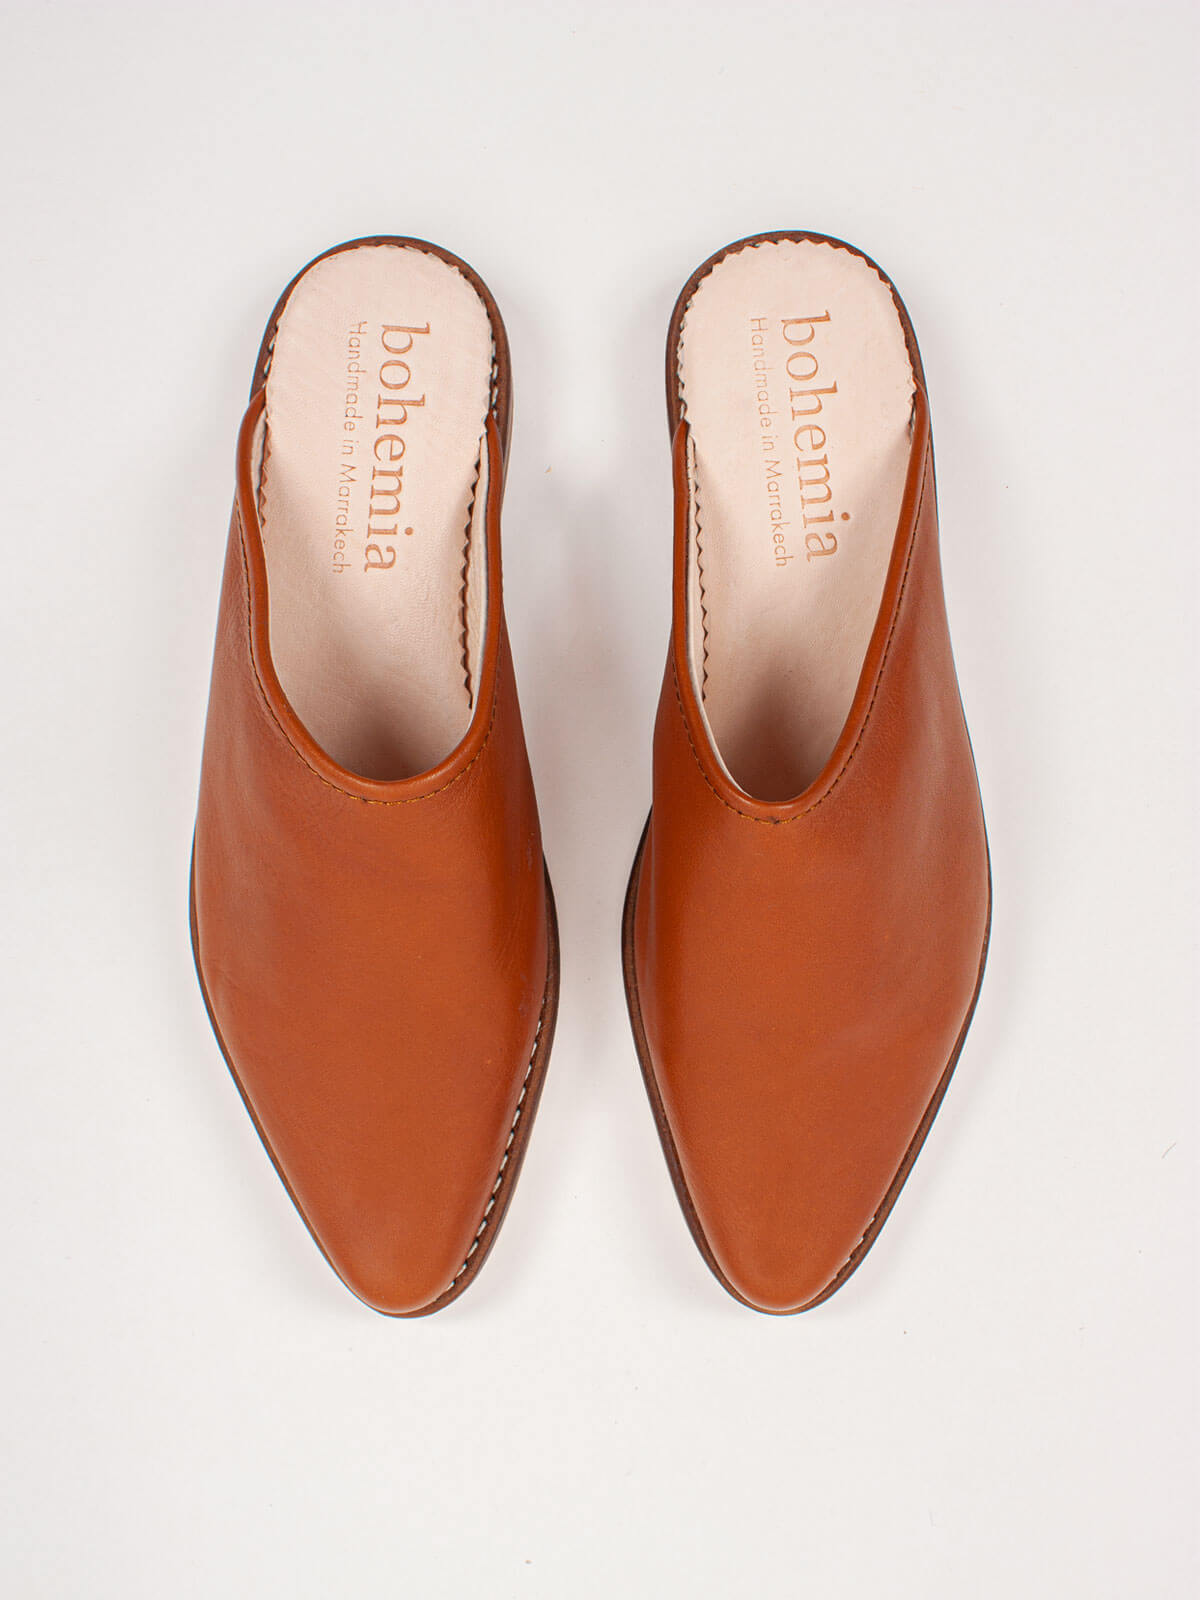 Leather Mules, Tan